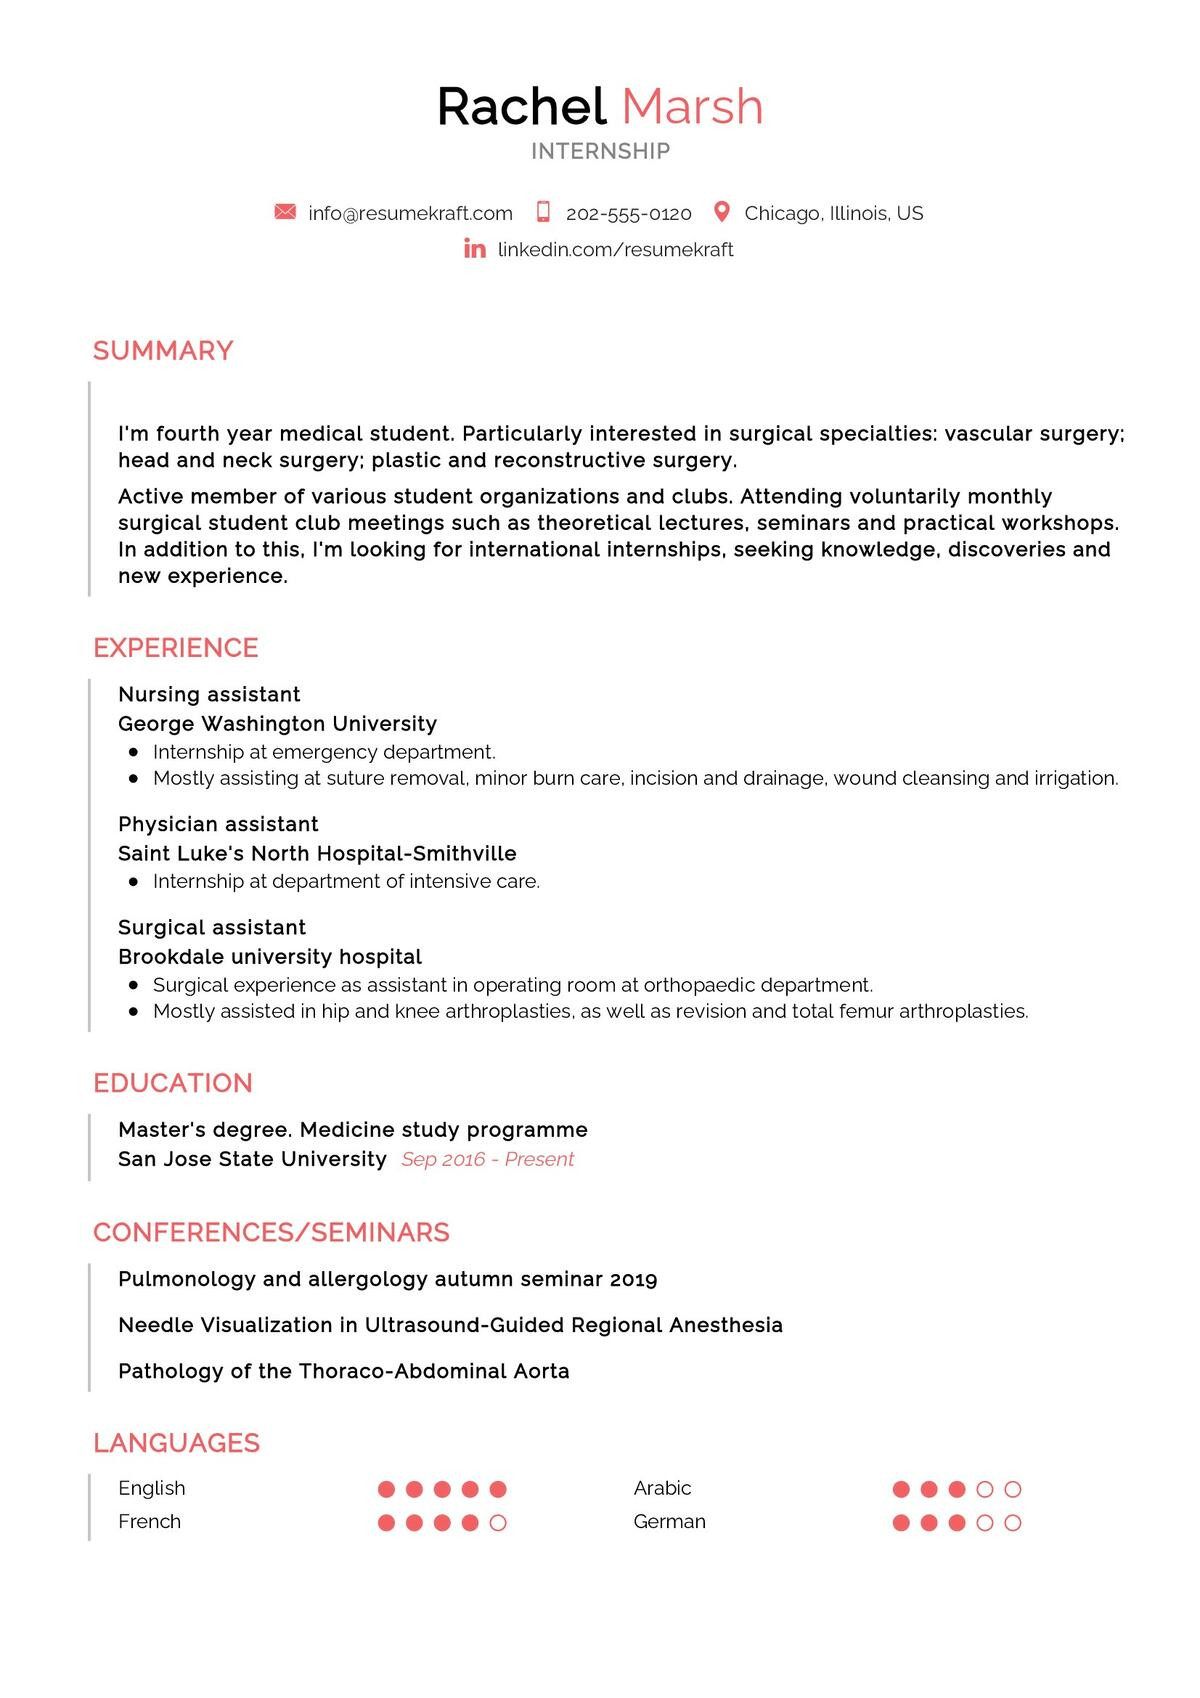 Sample Resume with Masters Degree and Internship Internship Resume Sample 2021 Writing Guide & Tips – Resumekraft